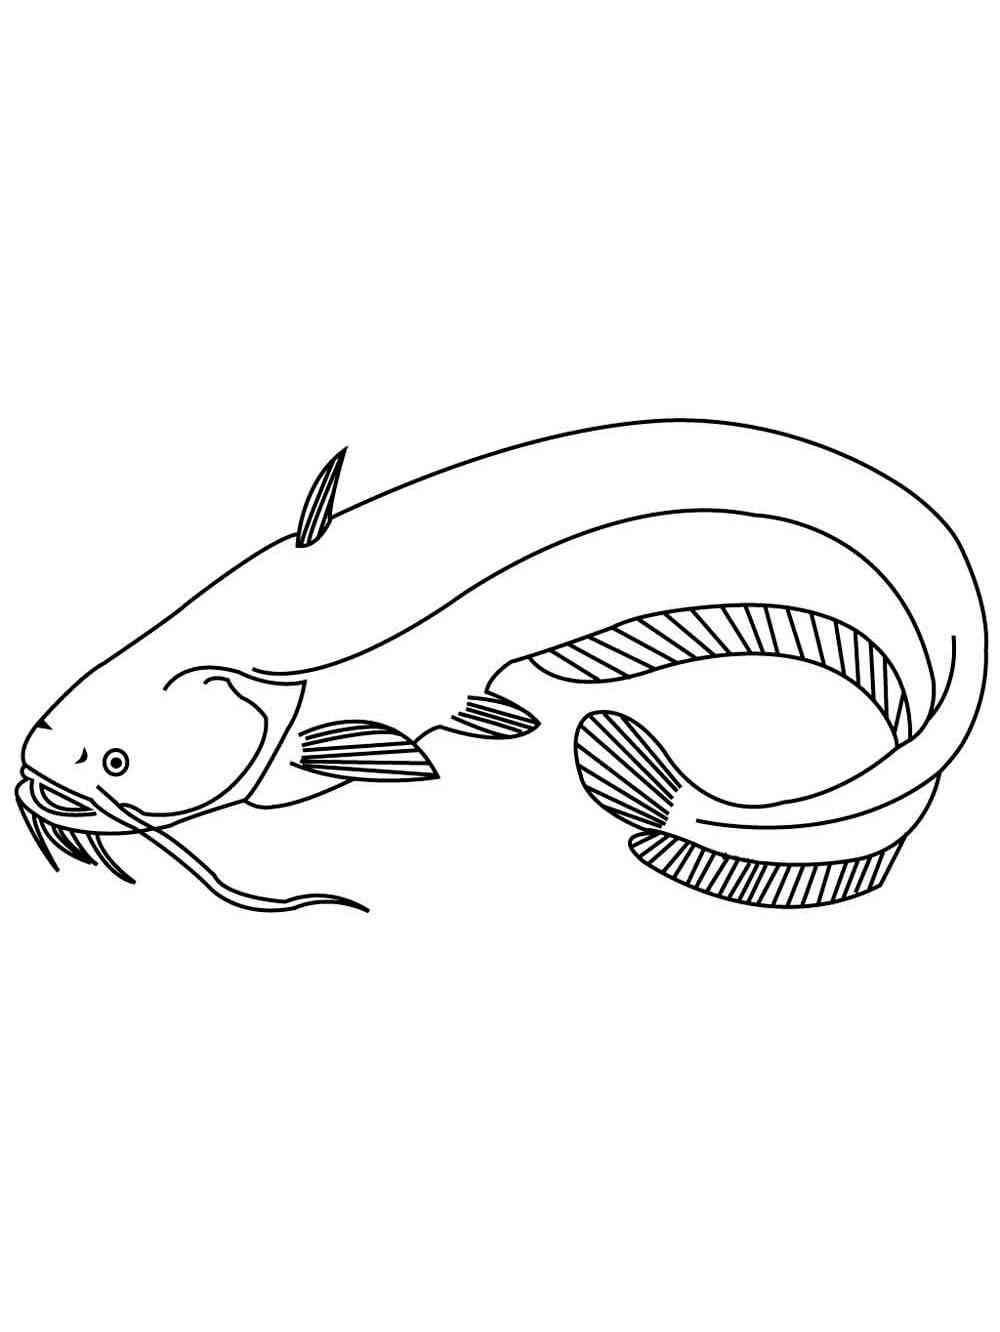 Catfish 13 coloring page